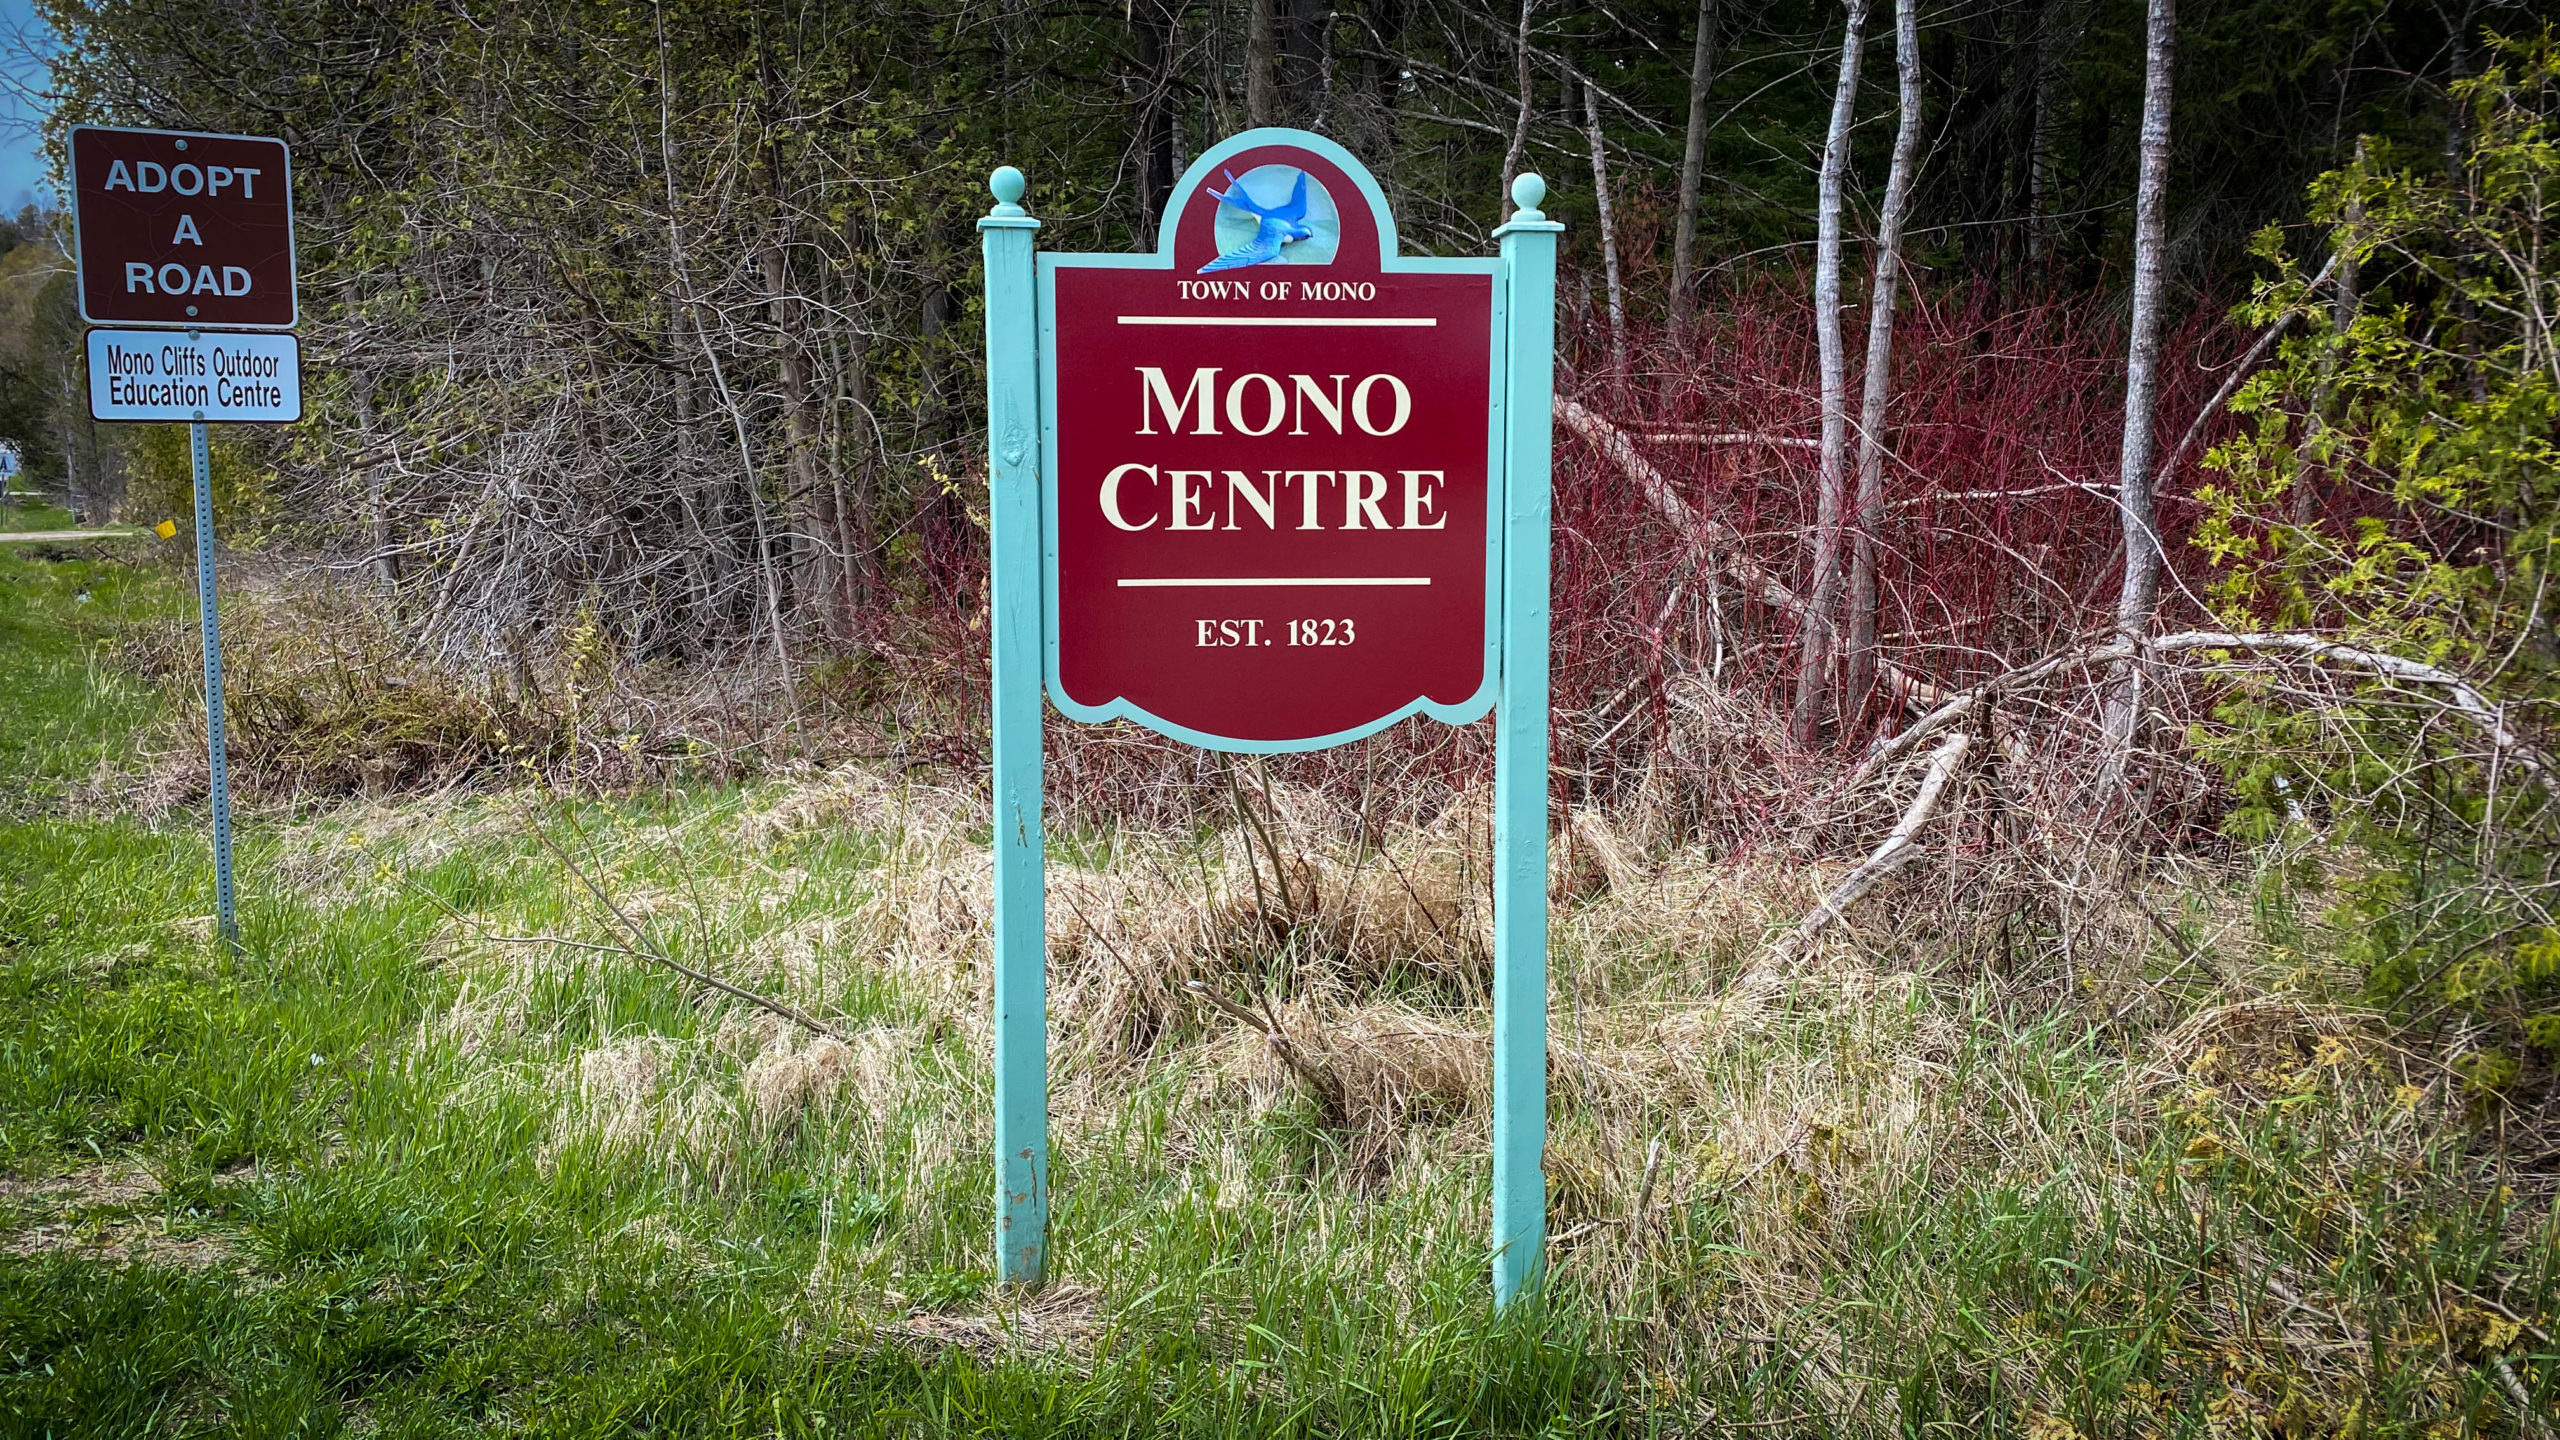 A Picture of Mono Centre Town Sign